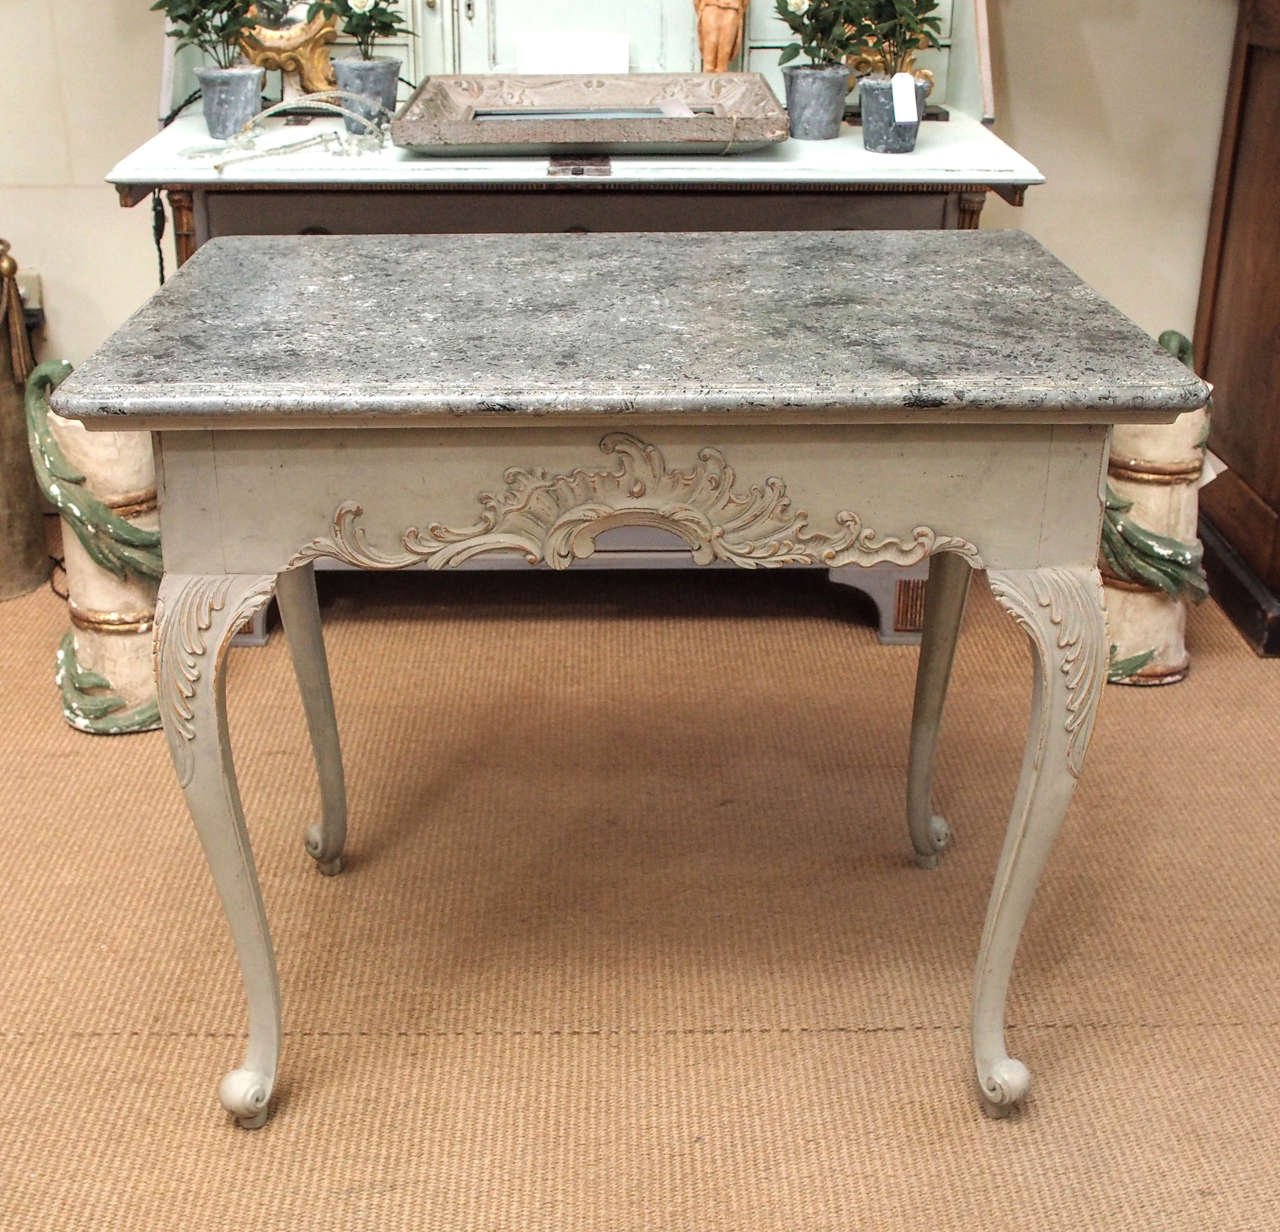 Late 1700s Gustavian style table with faux marble top - beautifully carved, lovely color, and great scale.